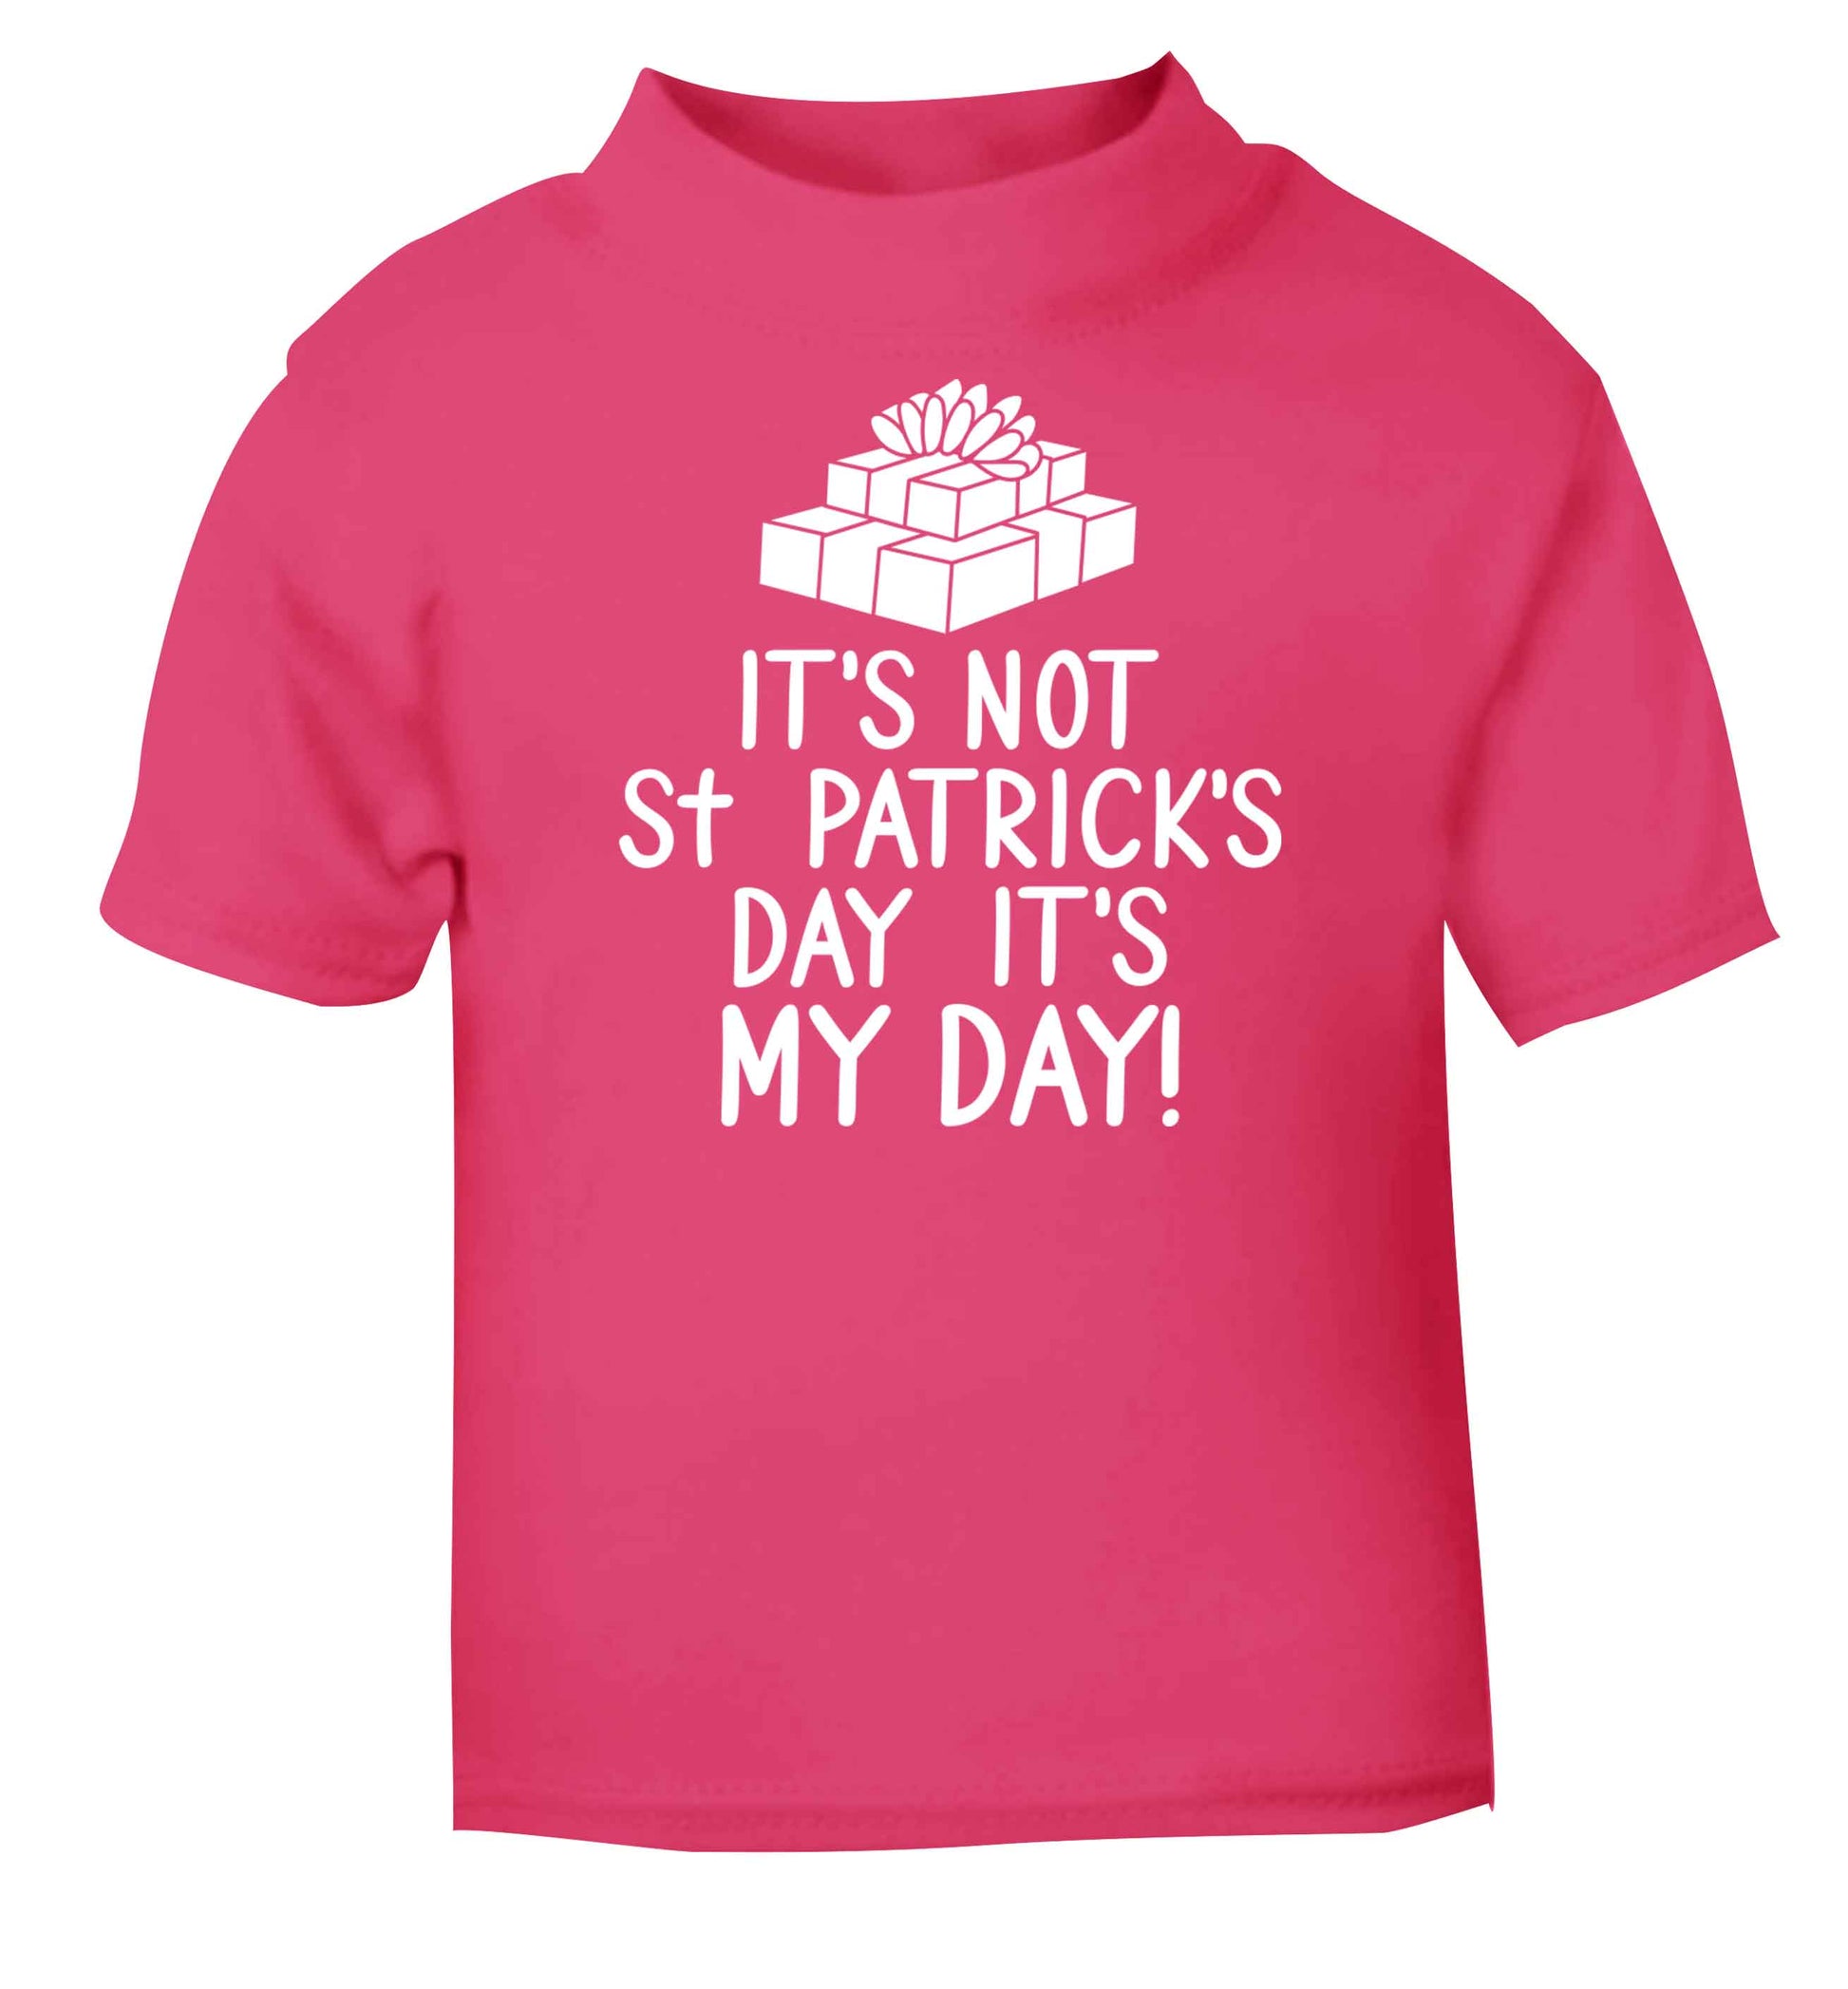 Funny gifts for your mum on mother's dayor her birthday! It's not St Patricks day it's my day pink baby toddler Tshirt 2 Years